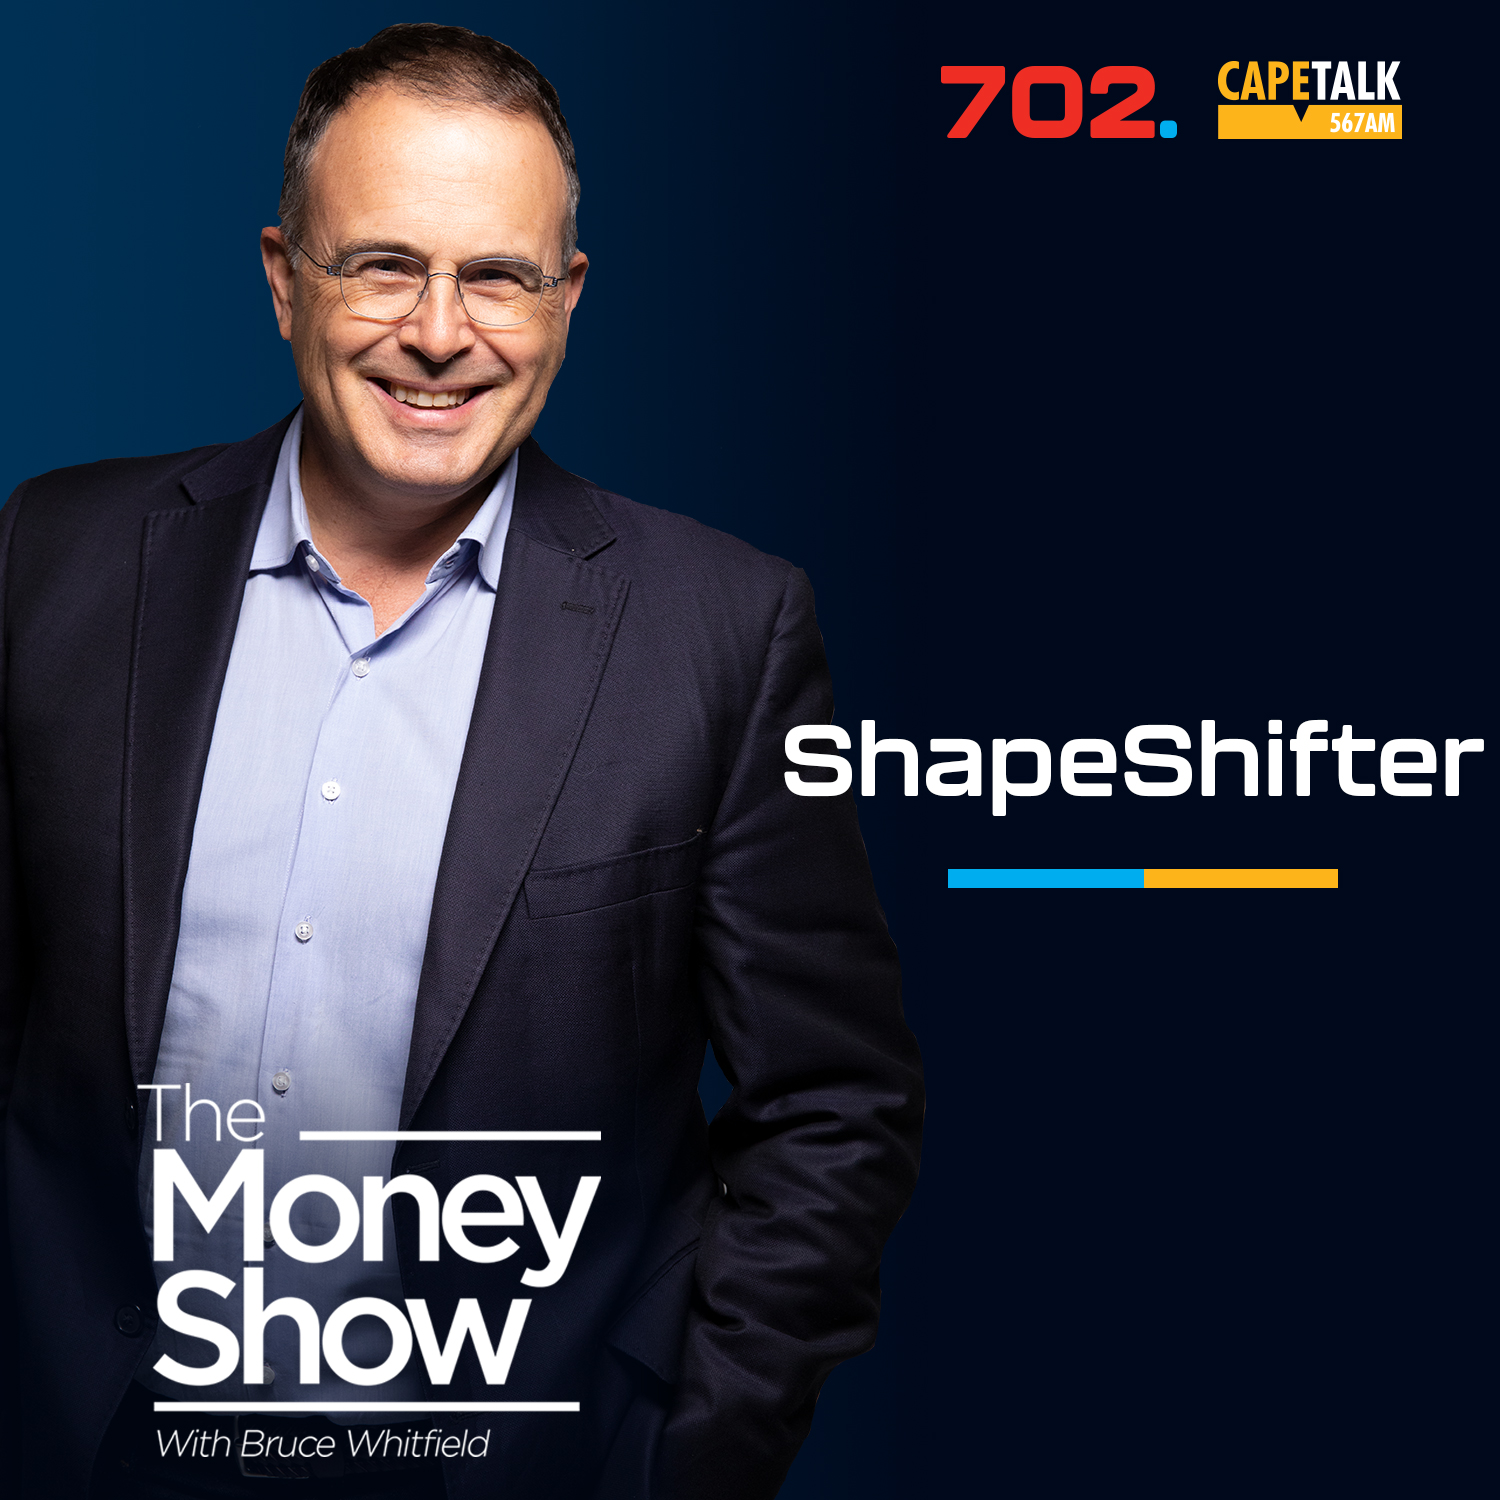 Shapeshifter -  Anthony Miller, CEO and co-founder of Simply, an insurtech startup